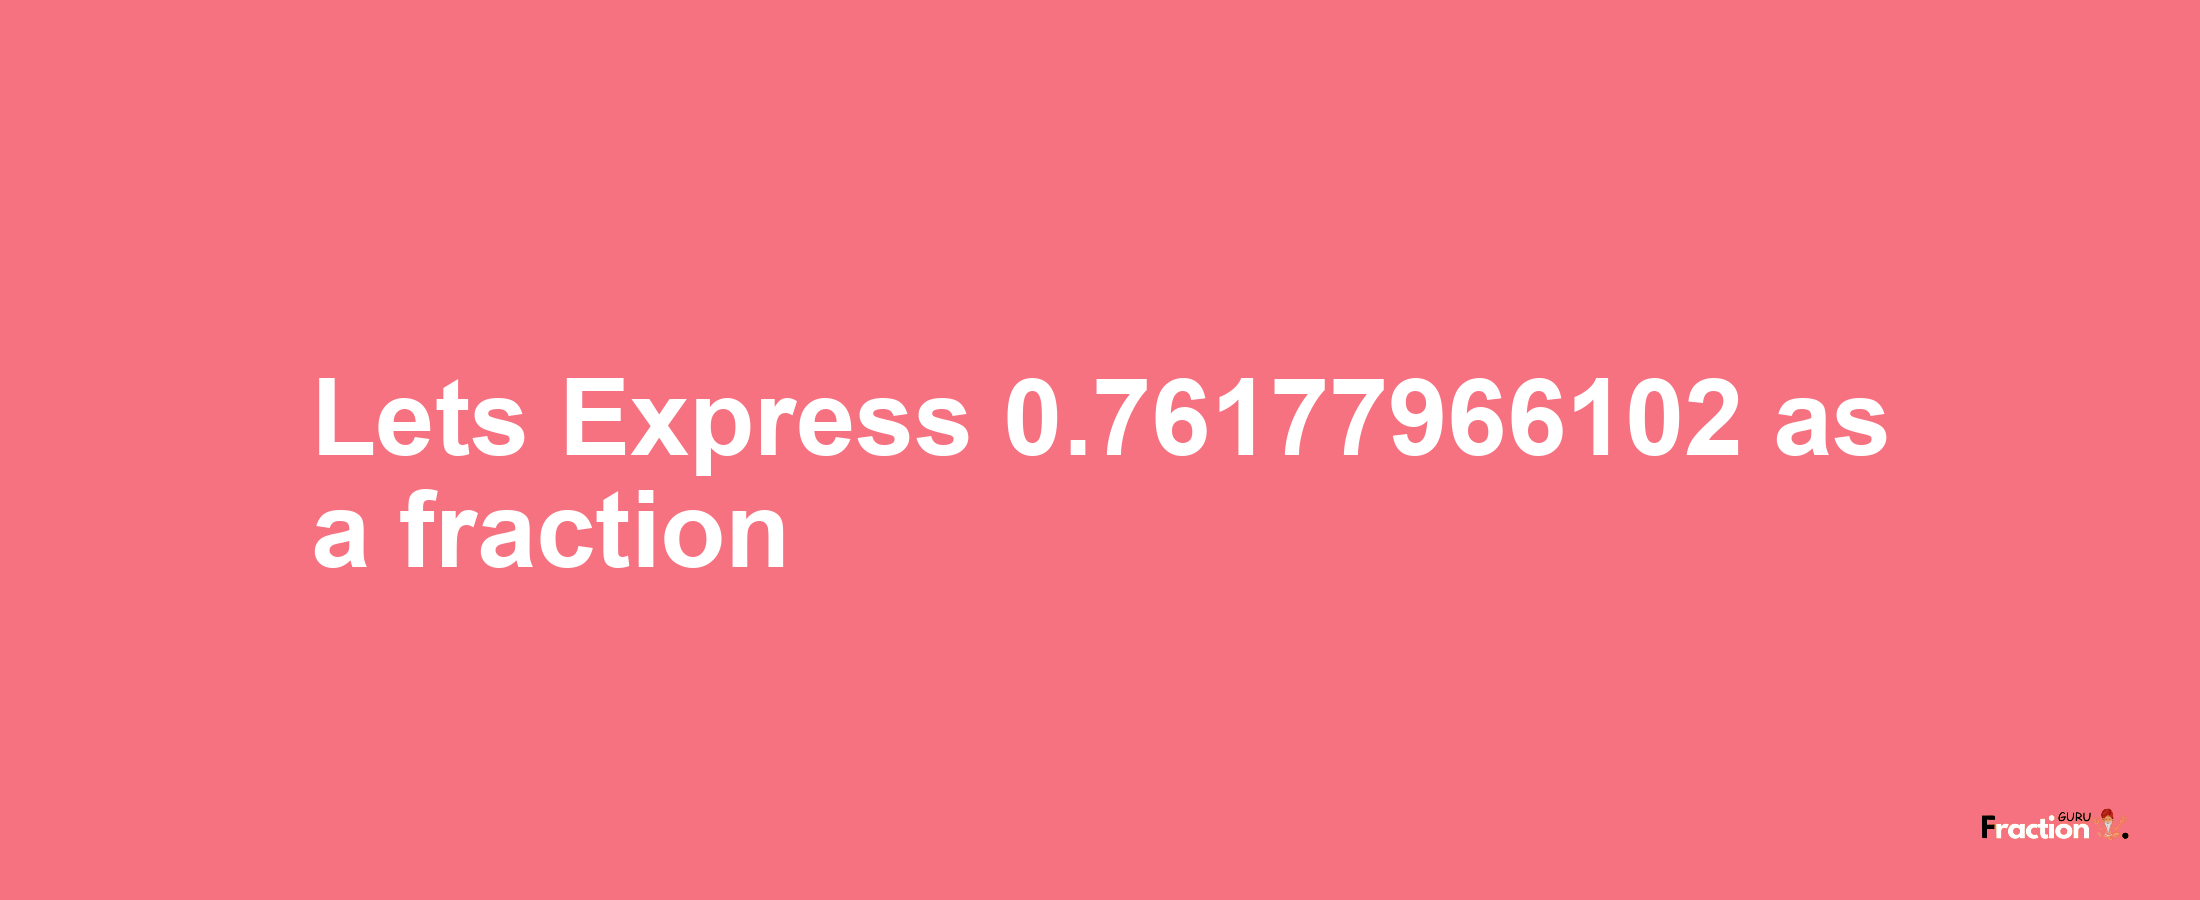 Lets Express 0.76177966102 as afraction